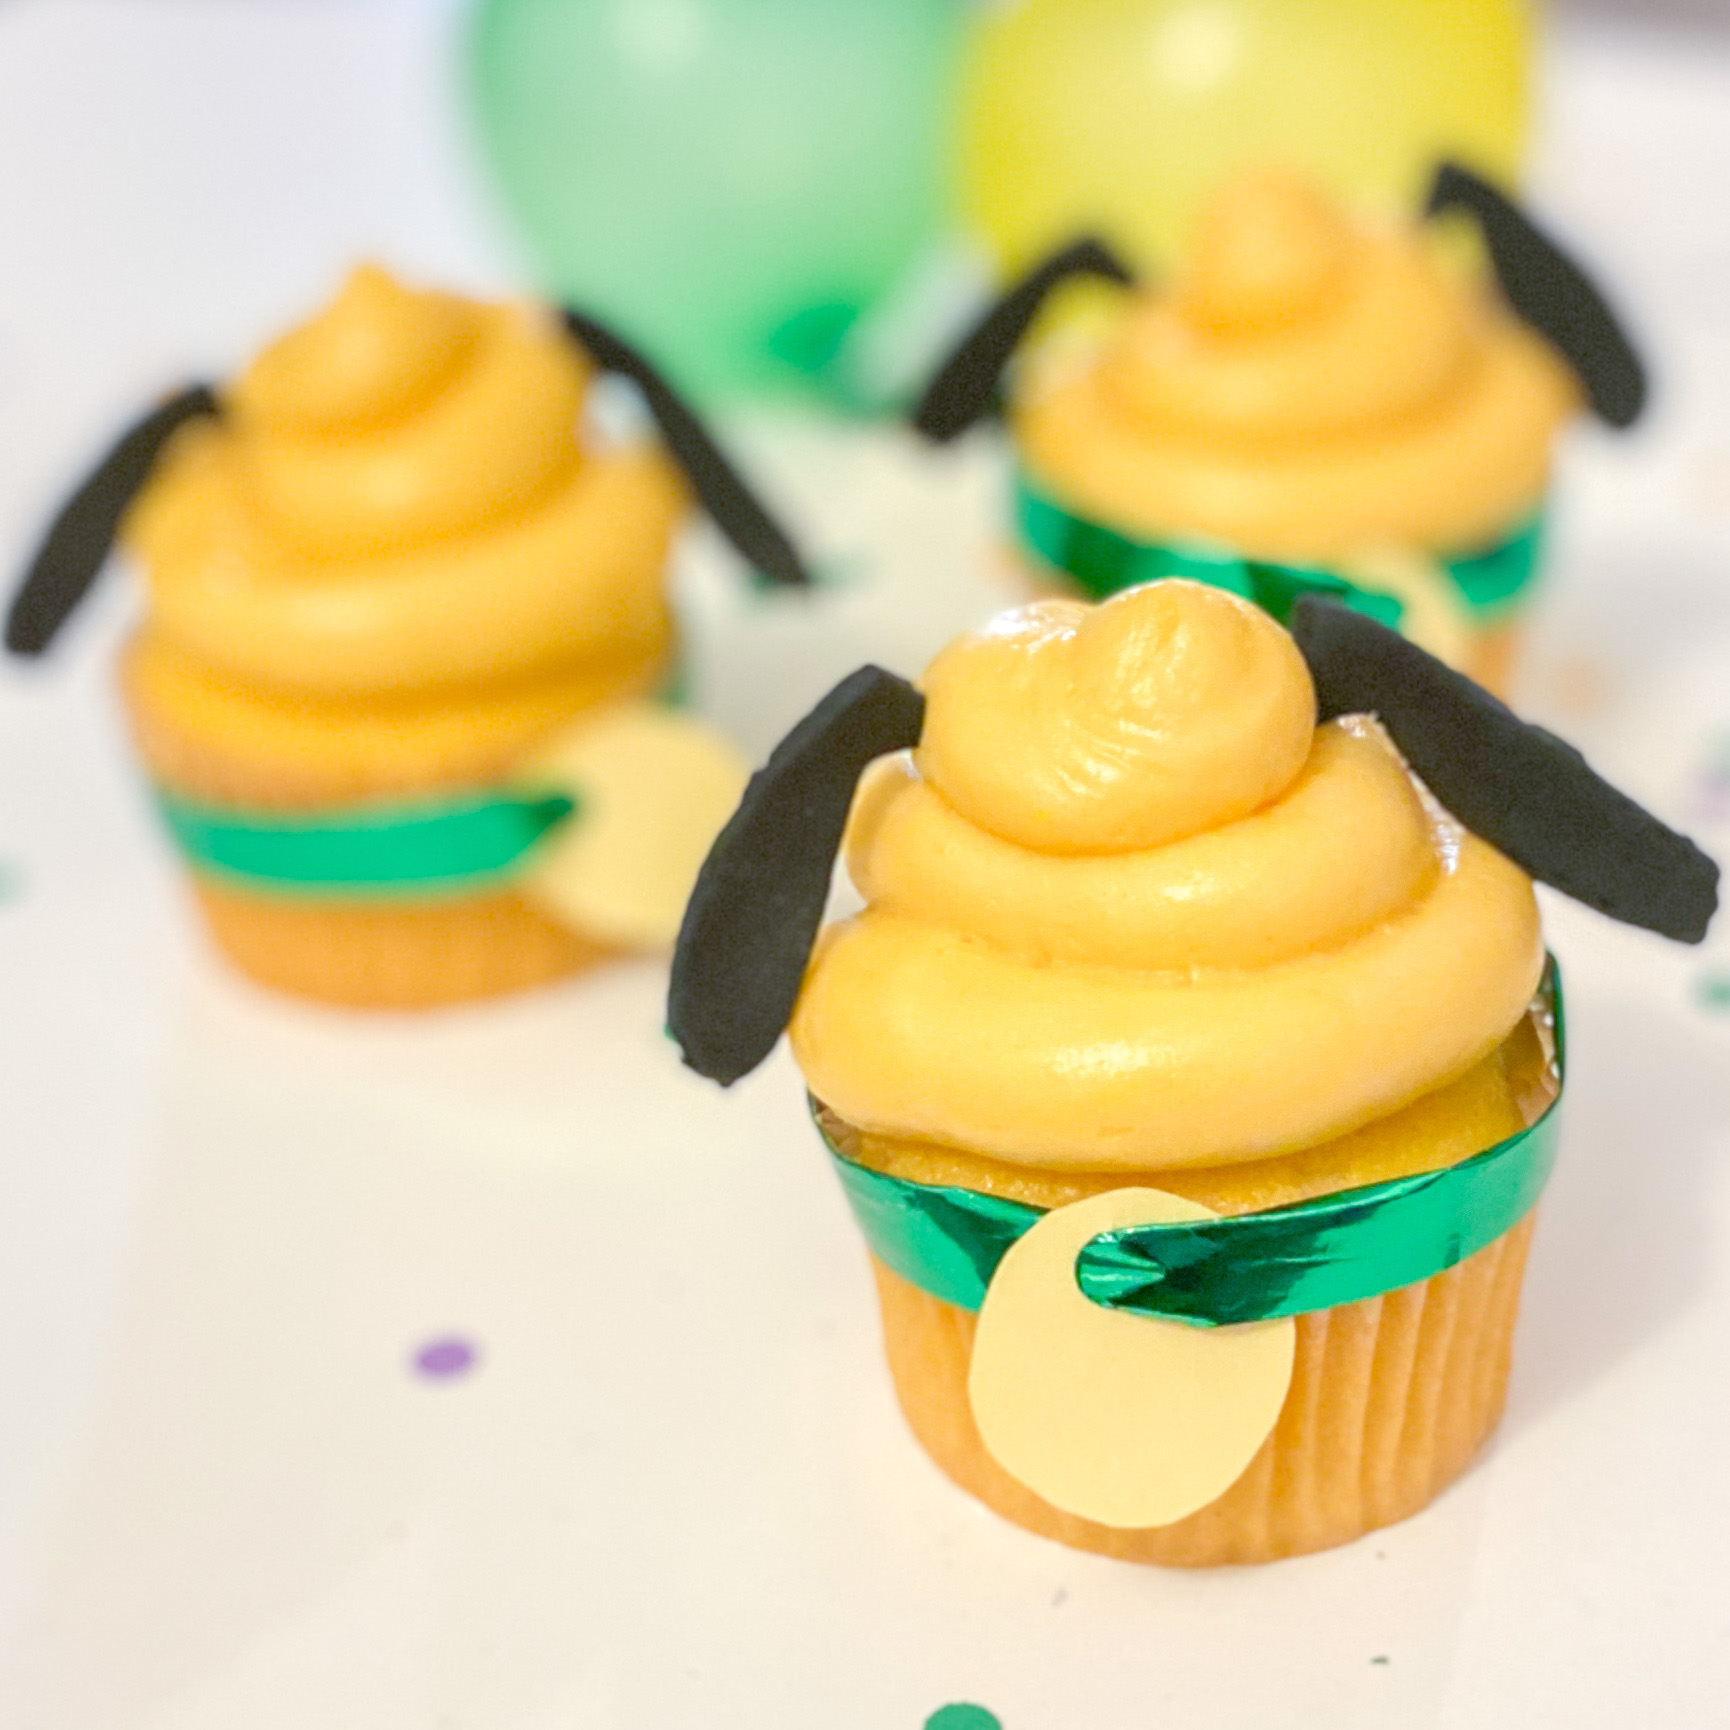 yellow pluto cupcake with fondant ears and yellow frosting